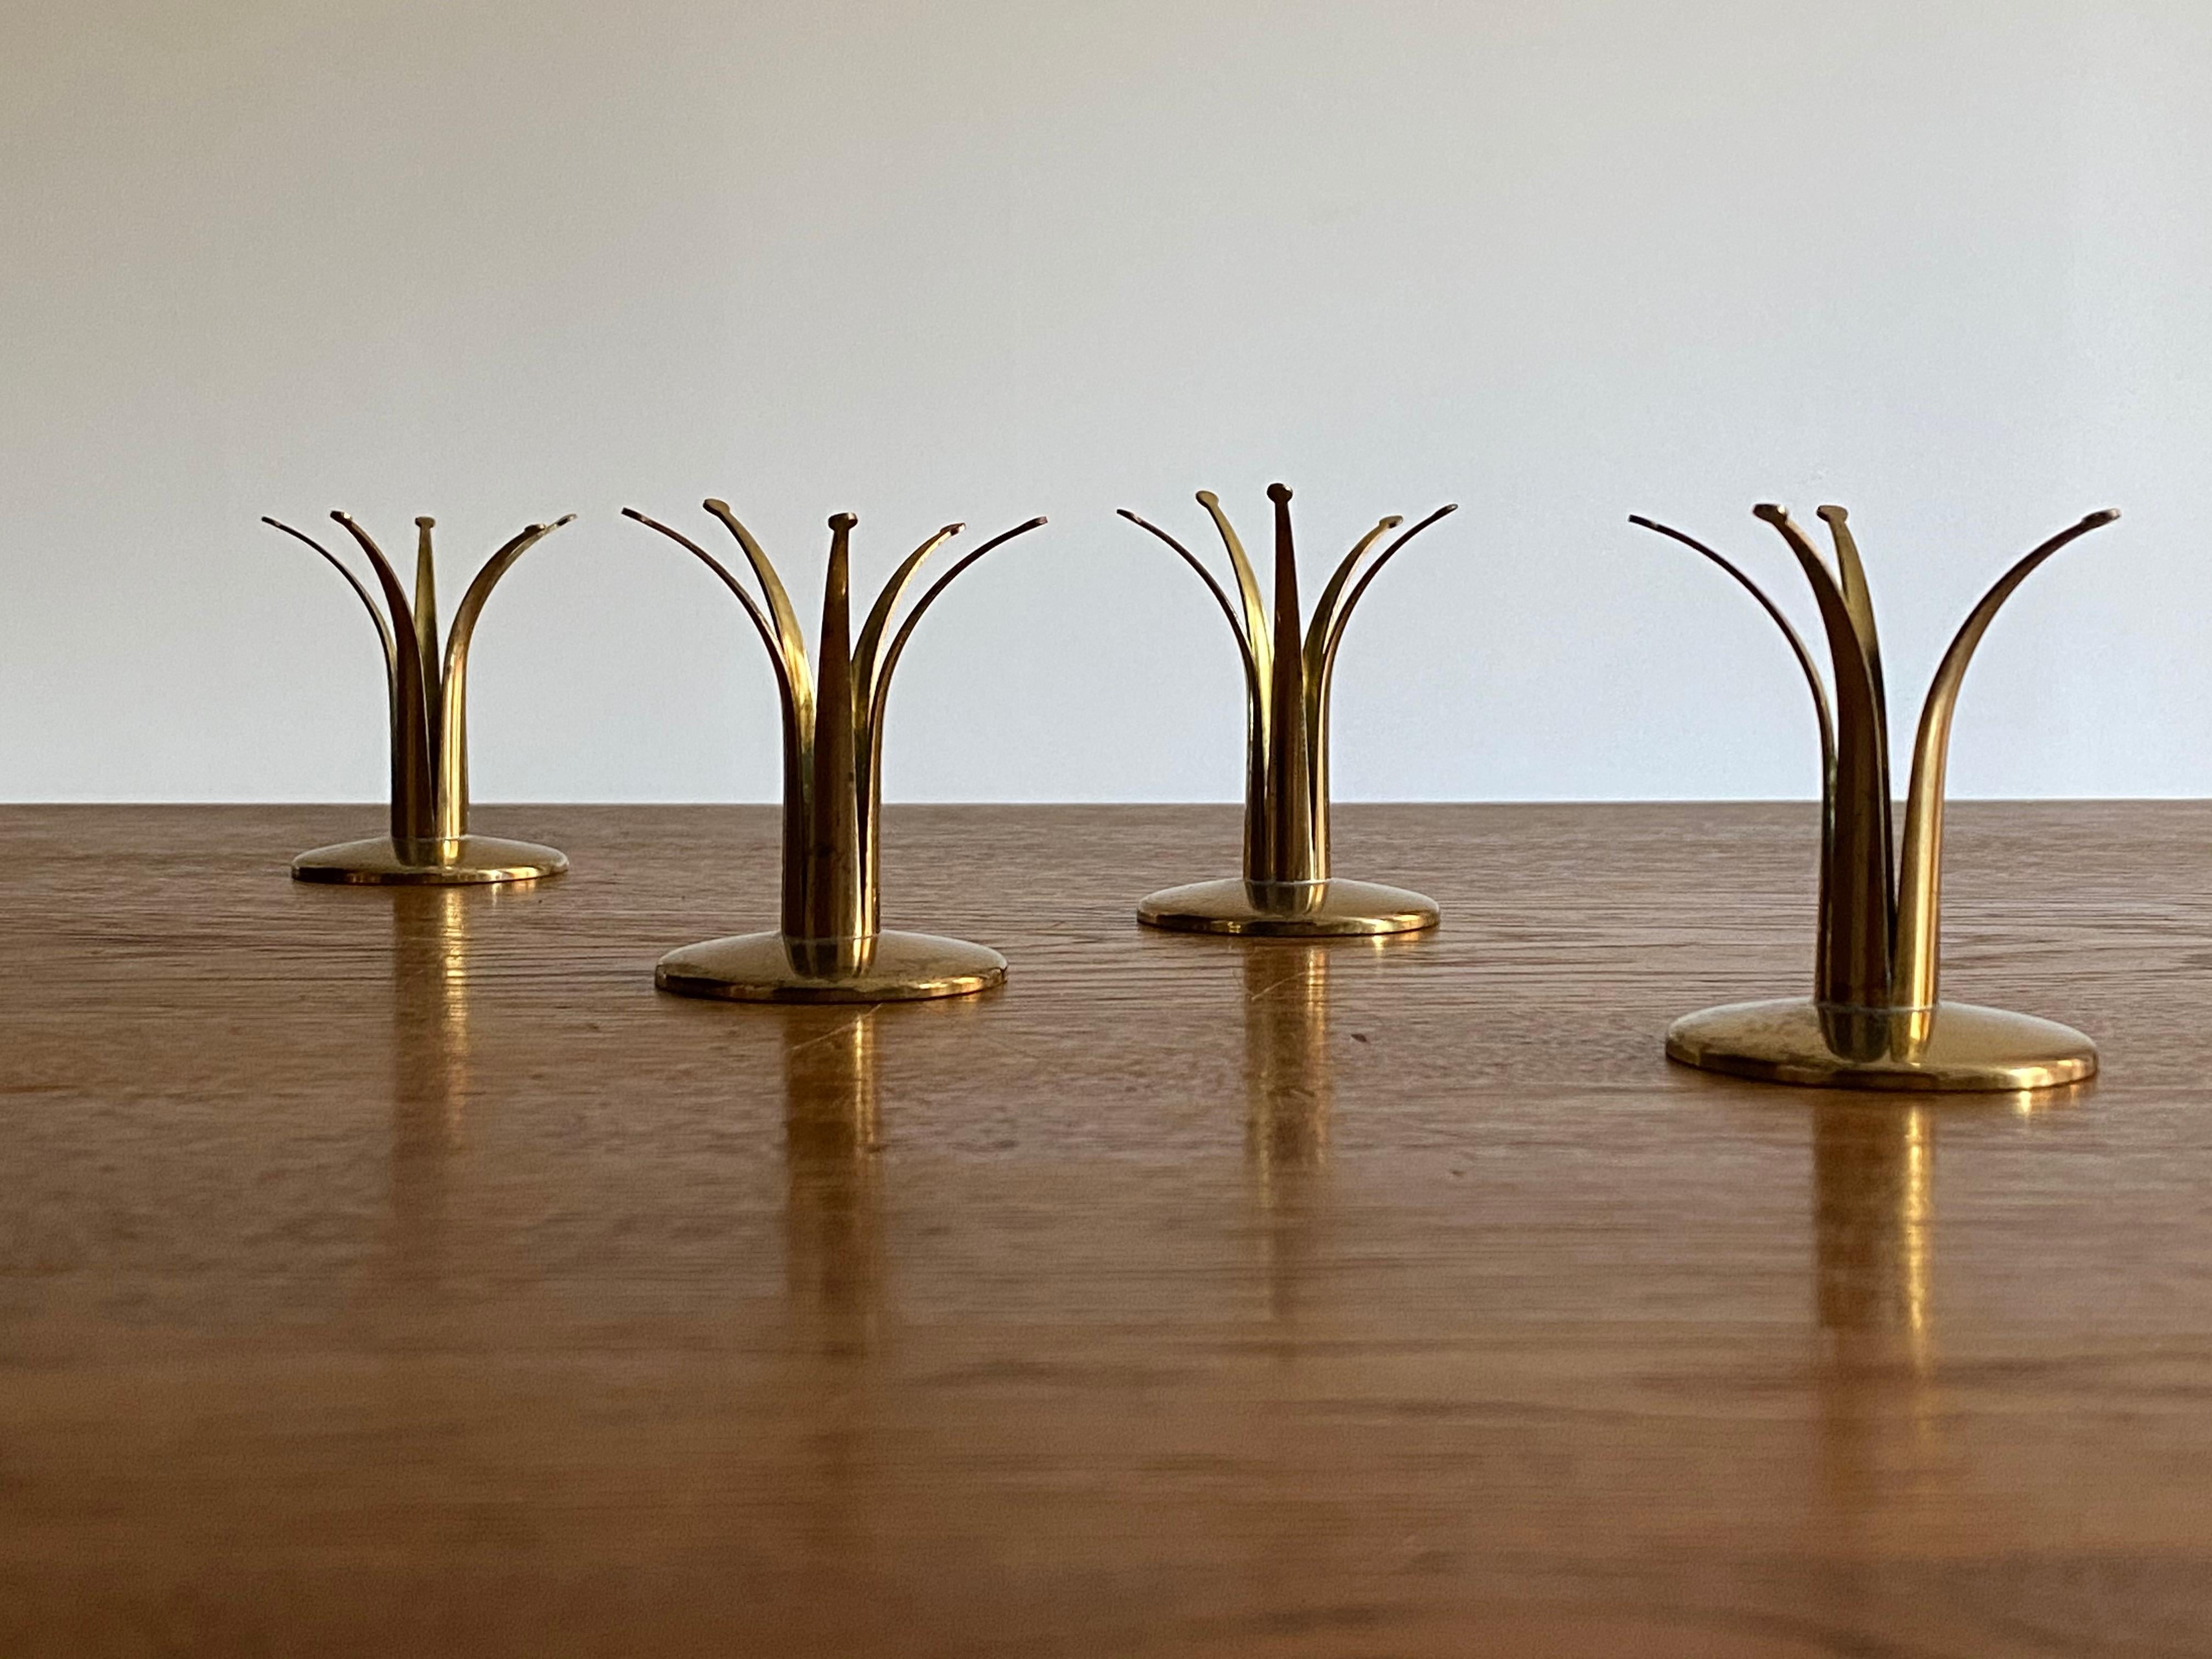 A set a 4 small brass candlesticks. Produced in Sweden, 1950s.

Other designers of the period include Paavo Tynell, Kaare Klint, Hans Agne Jacobsen, and Alvar Aalto.